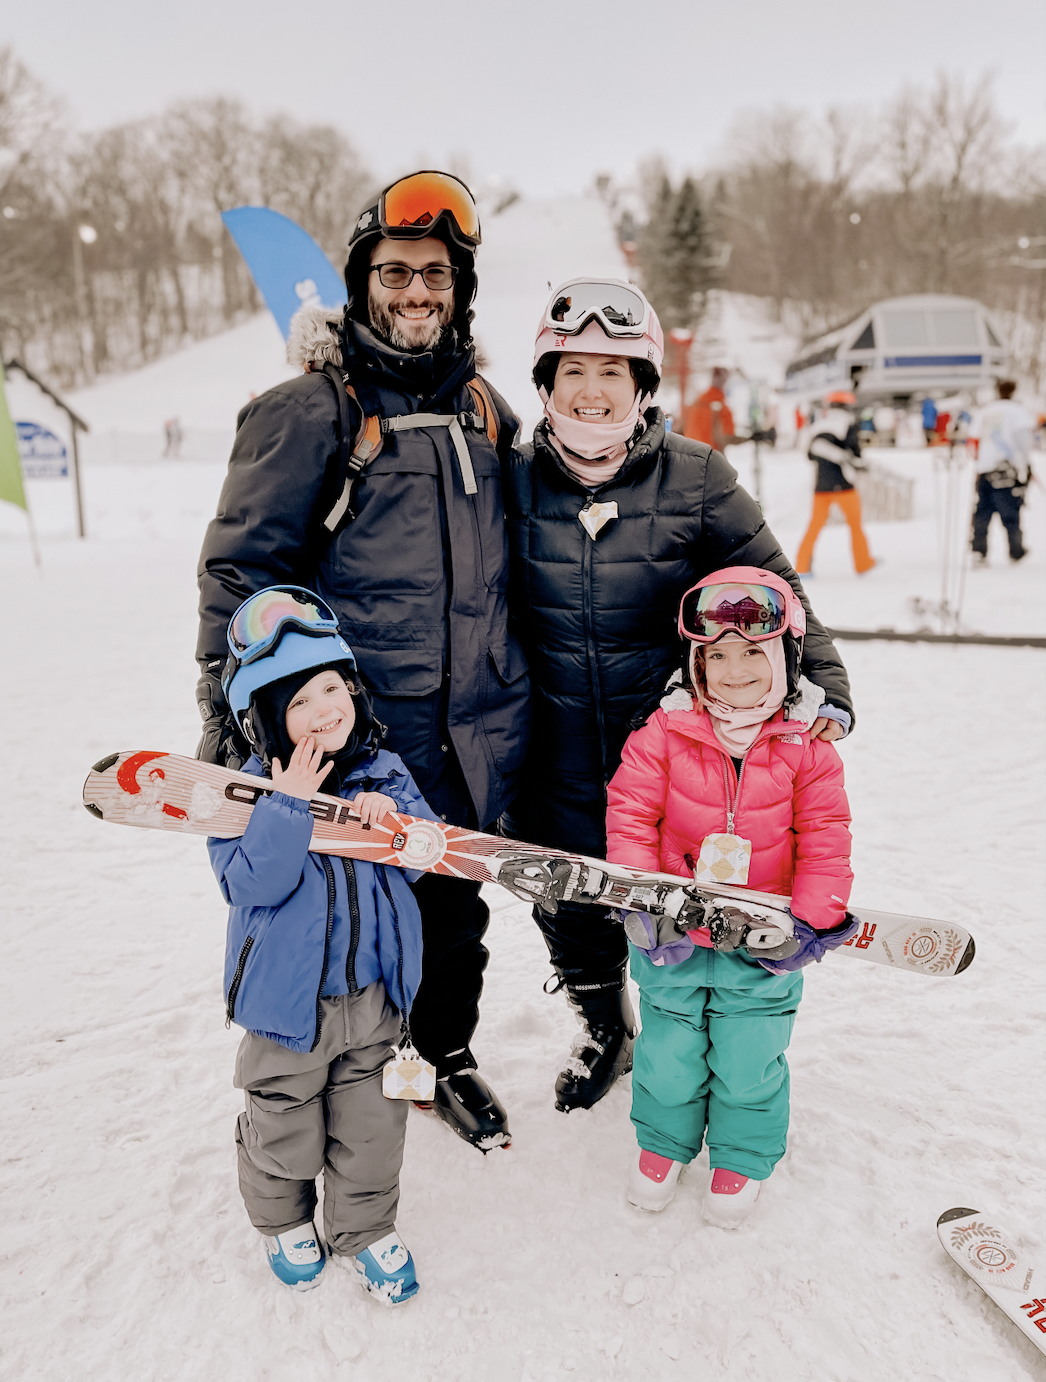 What to know before you ski with kids